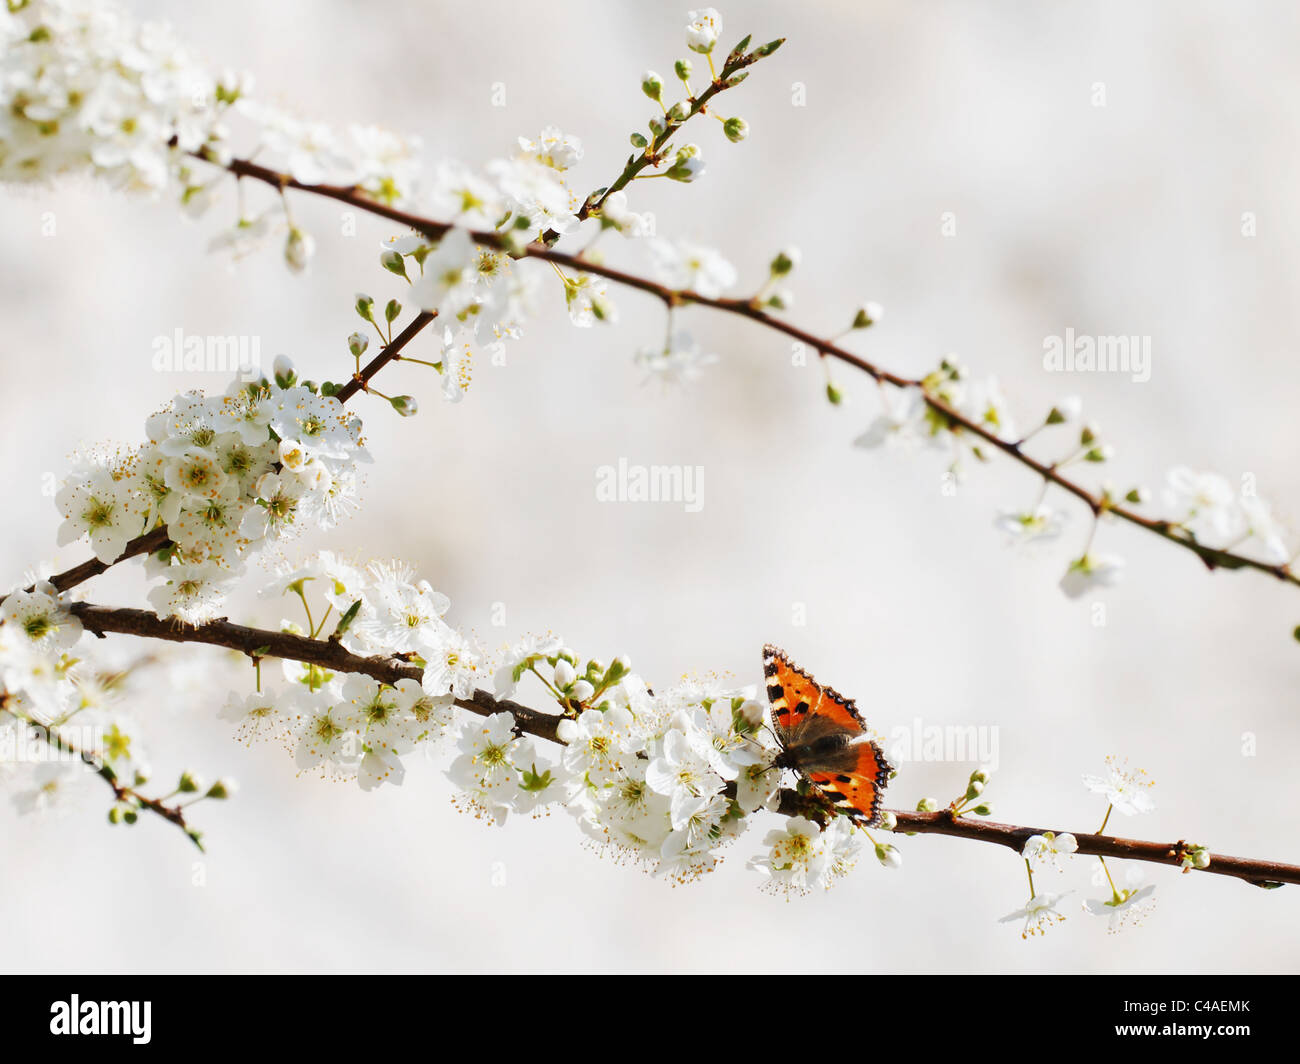 Nymphalidae sp (Aglais) butterfly on spring flower branches Stock Photo